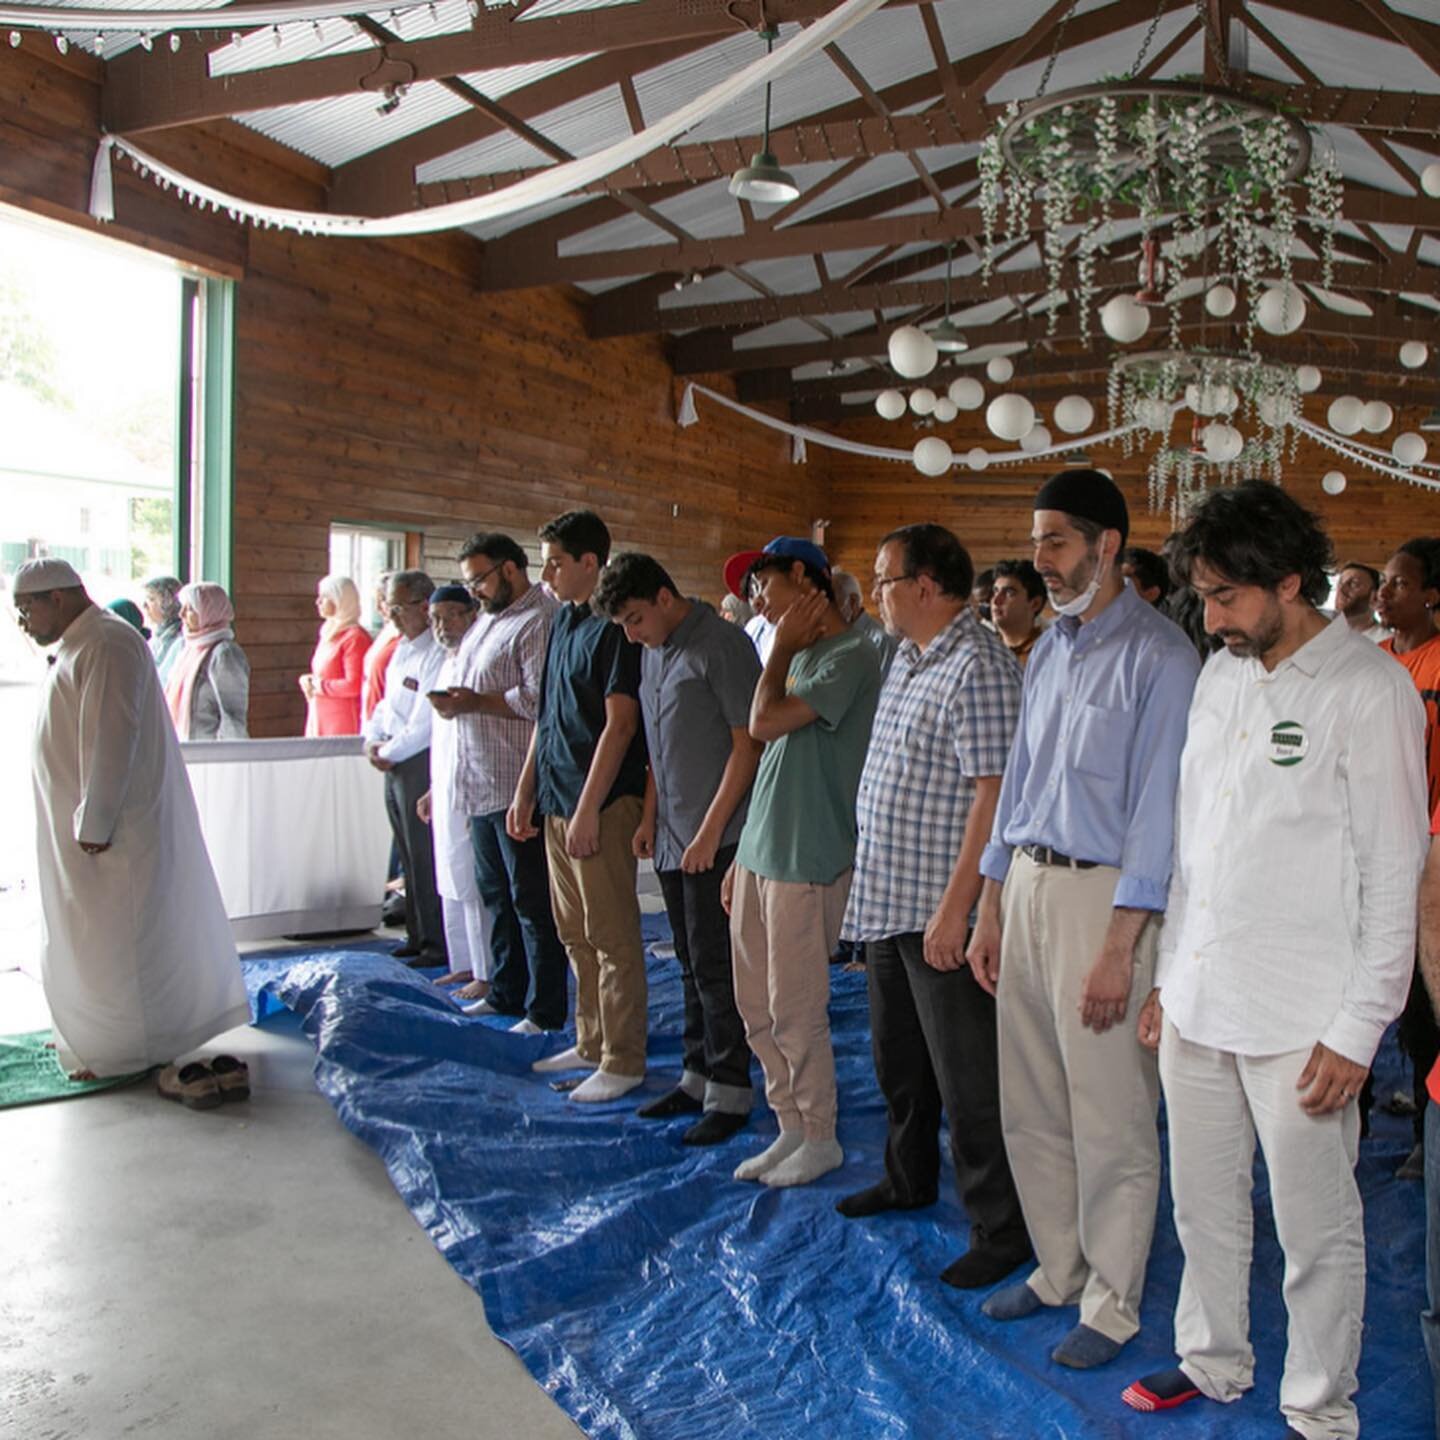 In the afternoon, a beautiful, live call to prayer filled the farm and prayer was lead inside the farm's airy stables. #nwmieid #eiduladha